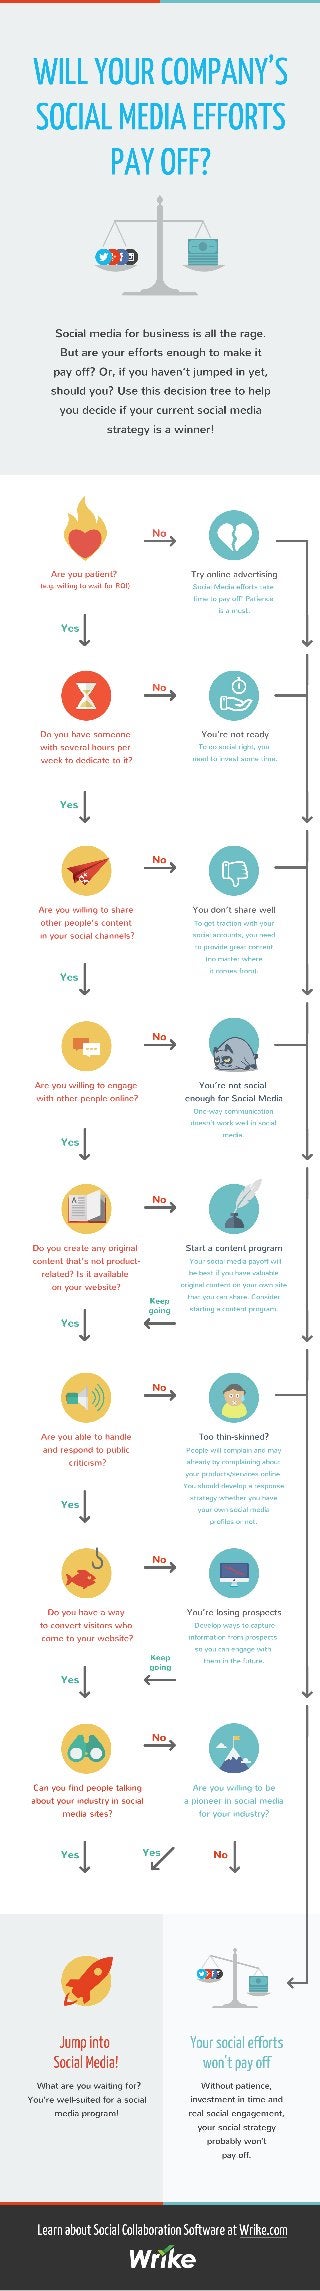 The Social Media Decision Tree: Will Your Company's Social Media Marketing Efforts Pay Off? (Infographic)